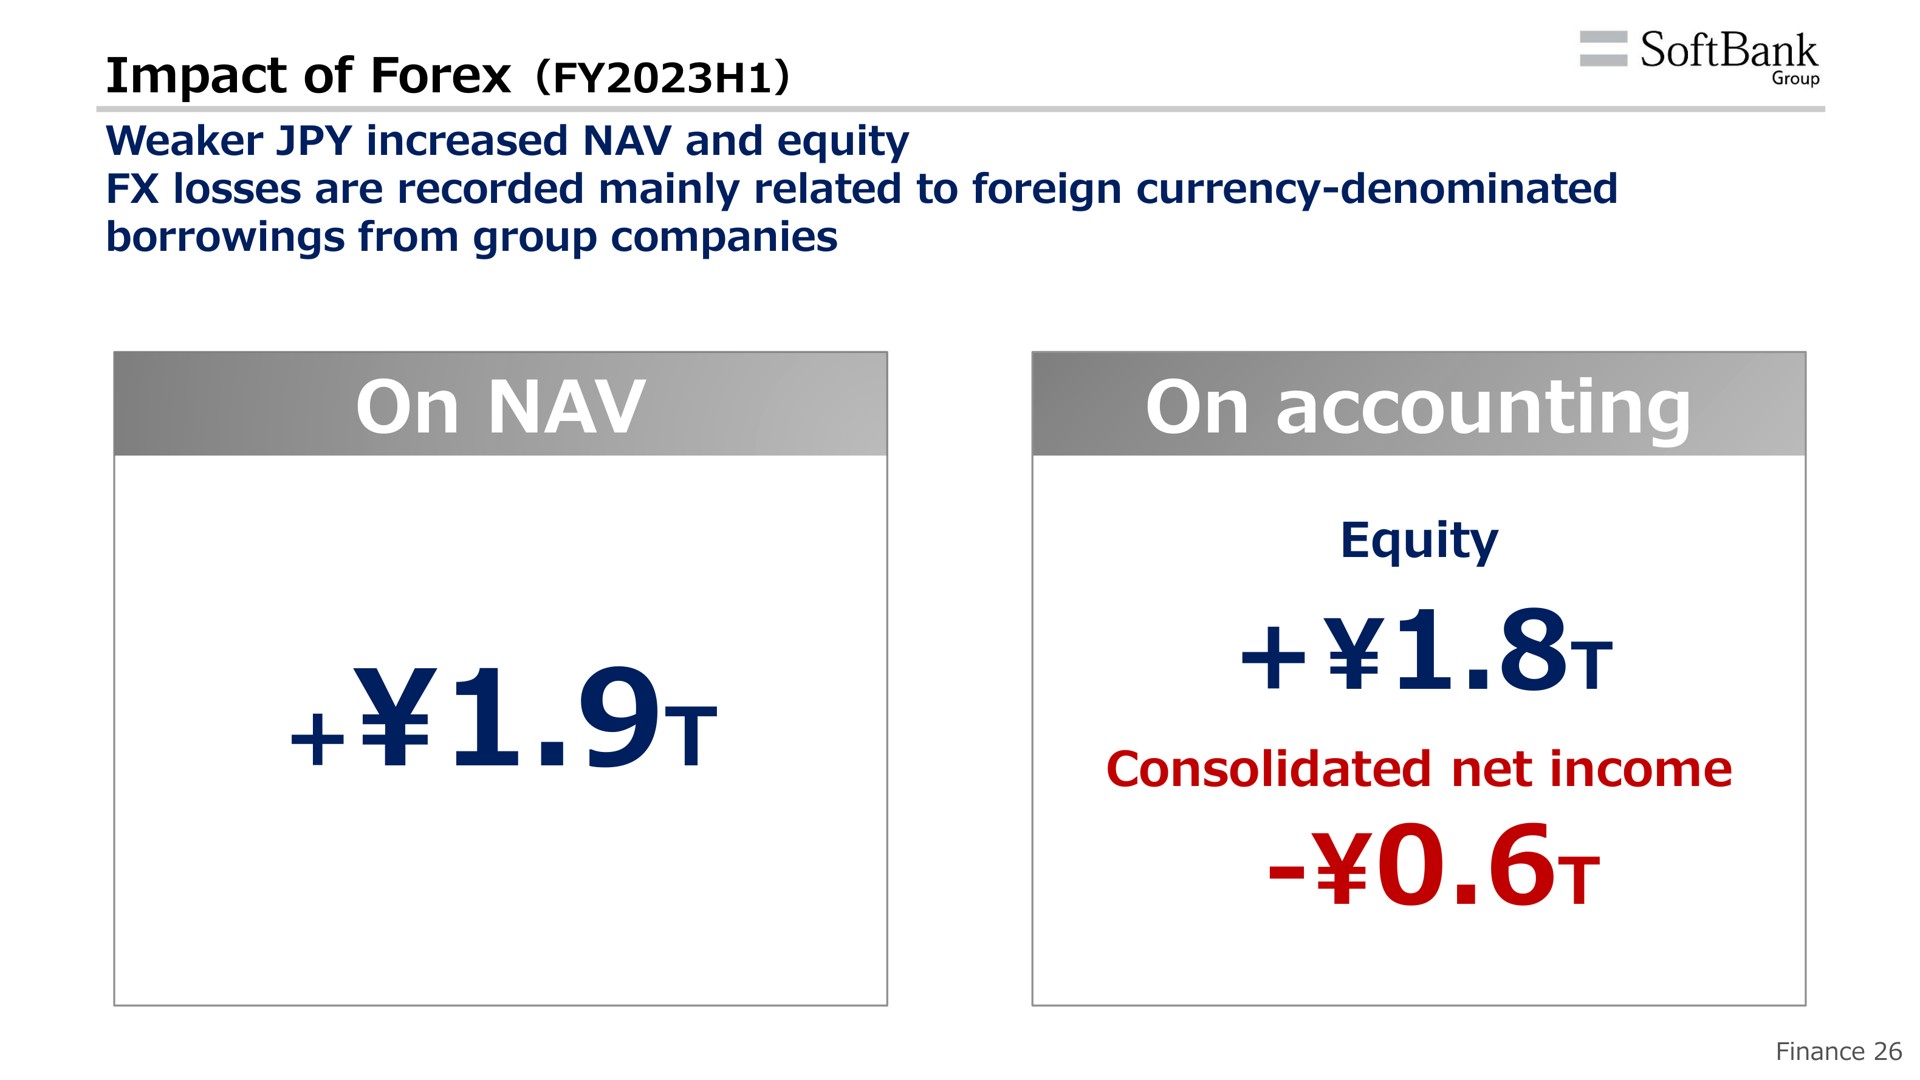 impact of on on accounting equity consolidated net income | SoftBank